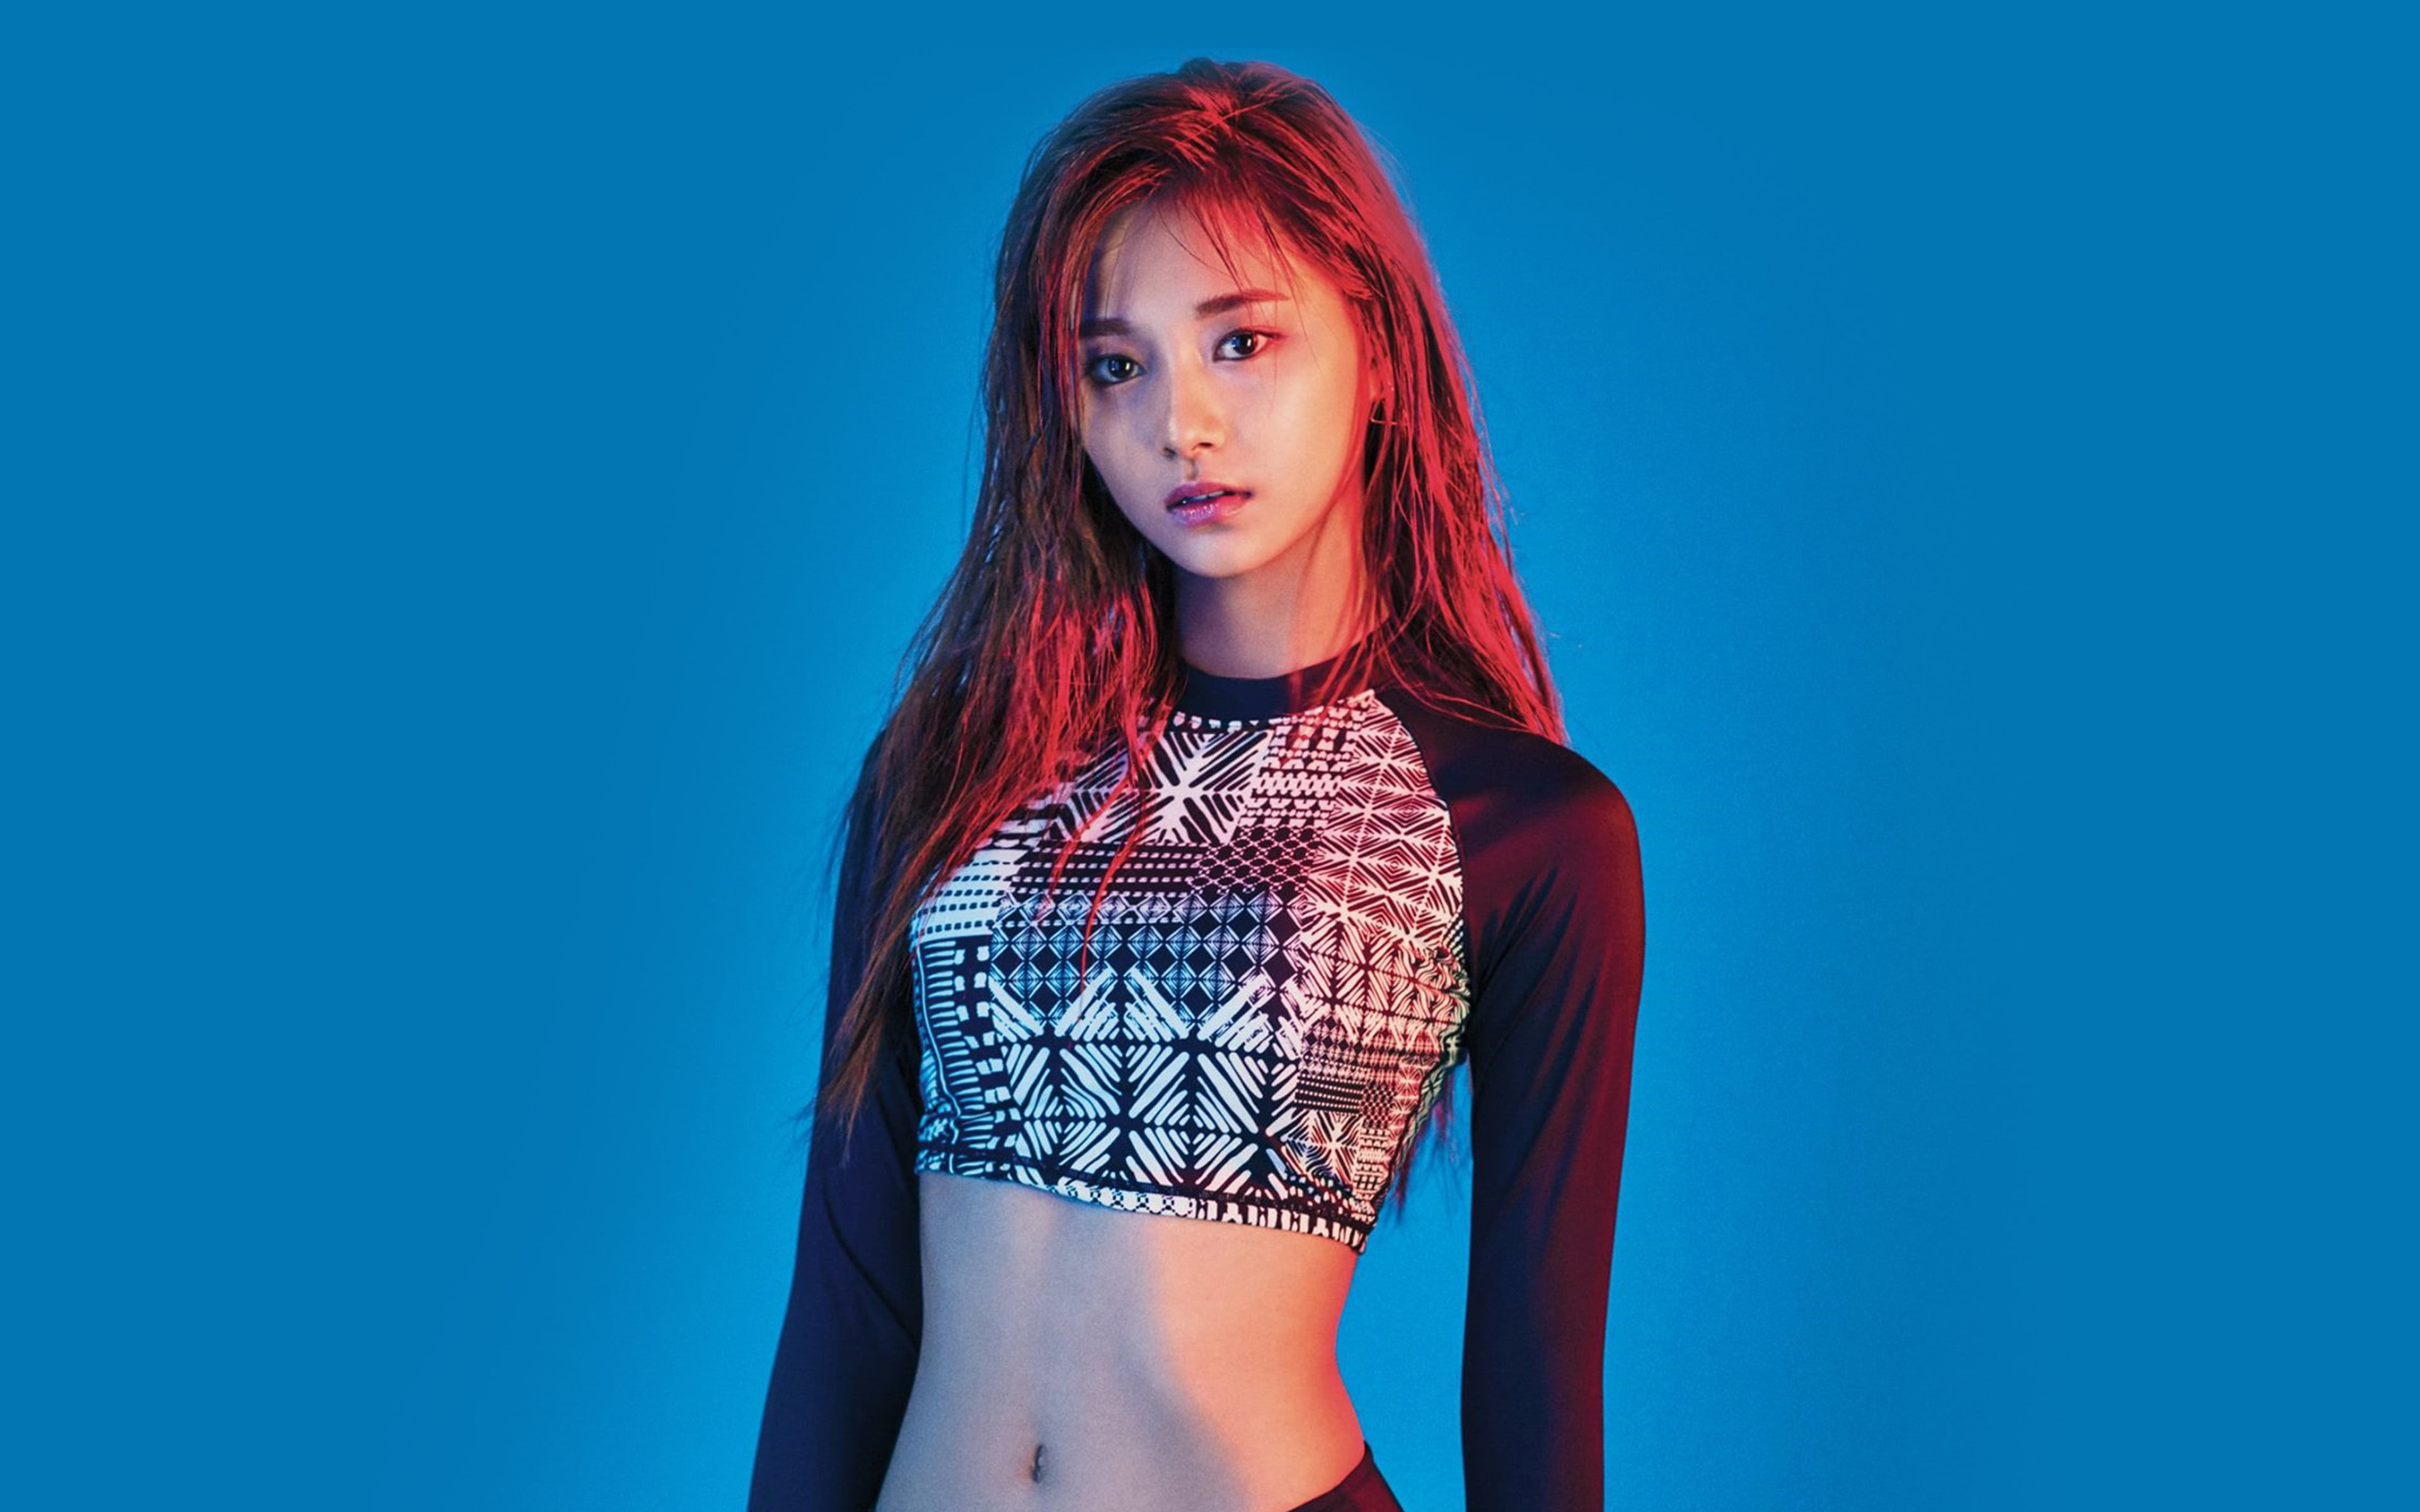 twice, blue, summer, girl, kpop, one person, studio shot, hairstyle